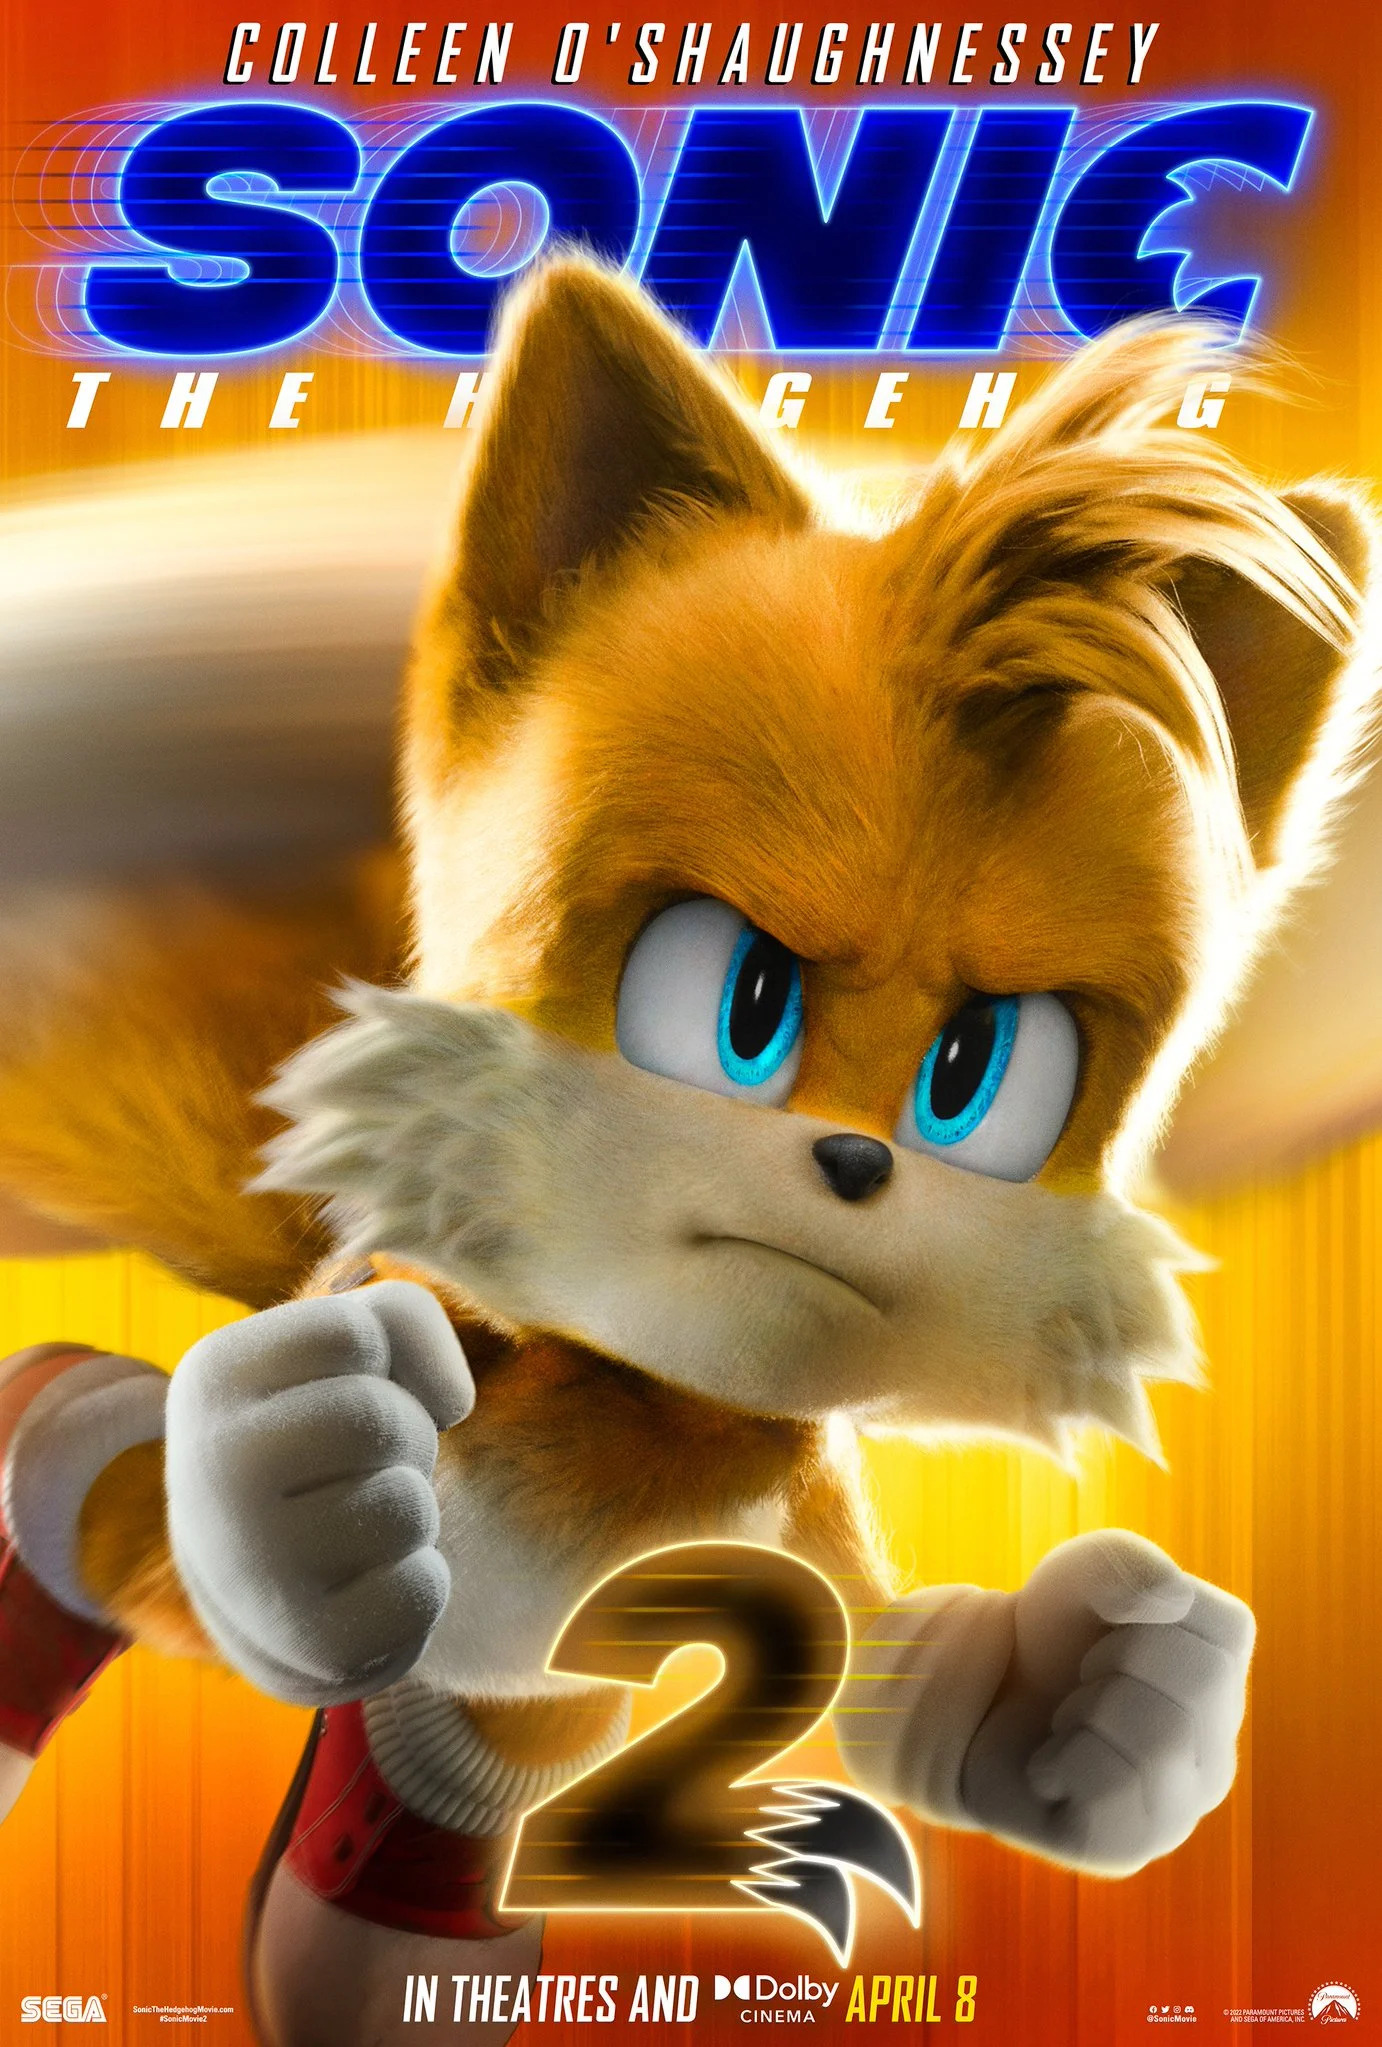 Mega Sized Movie Poster Image for Sonic the Hedgehog 2 (#16 of 34)